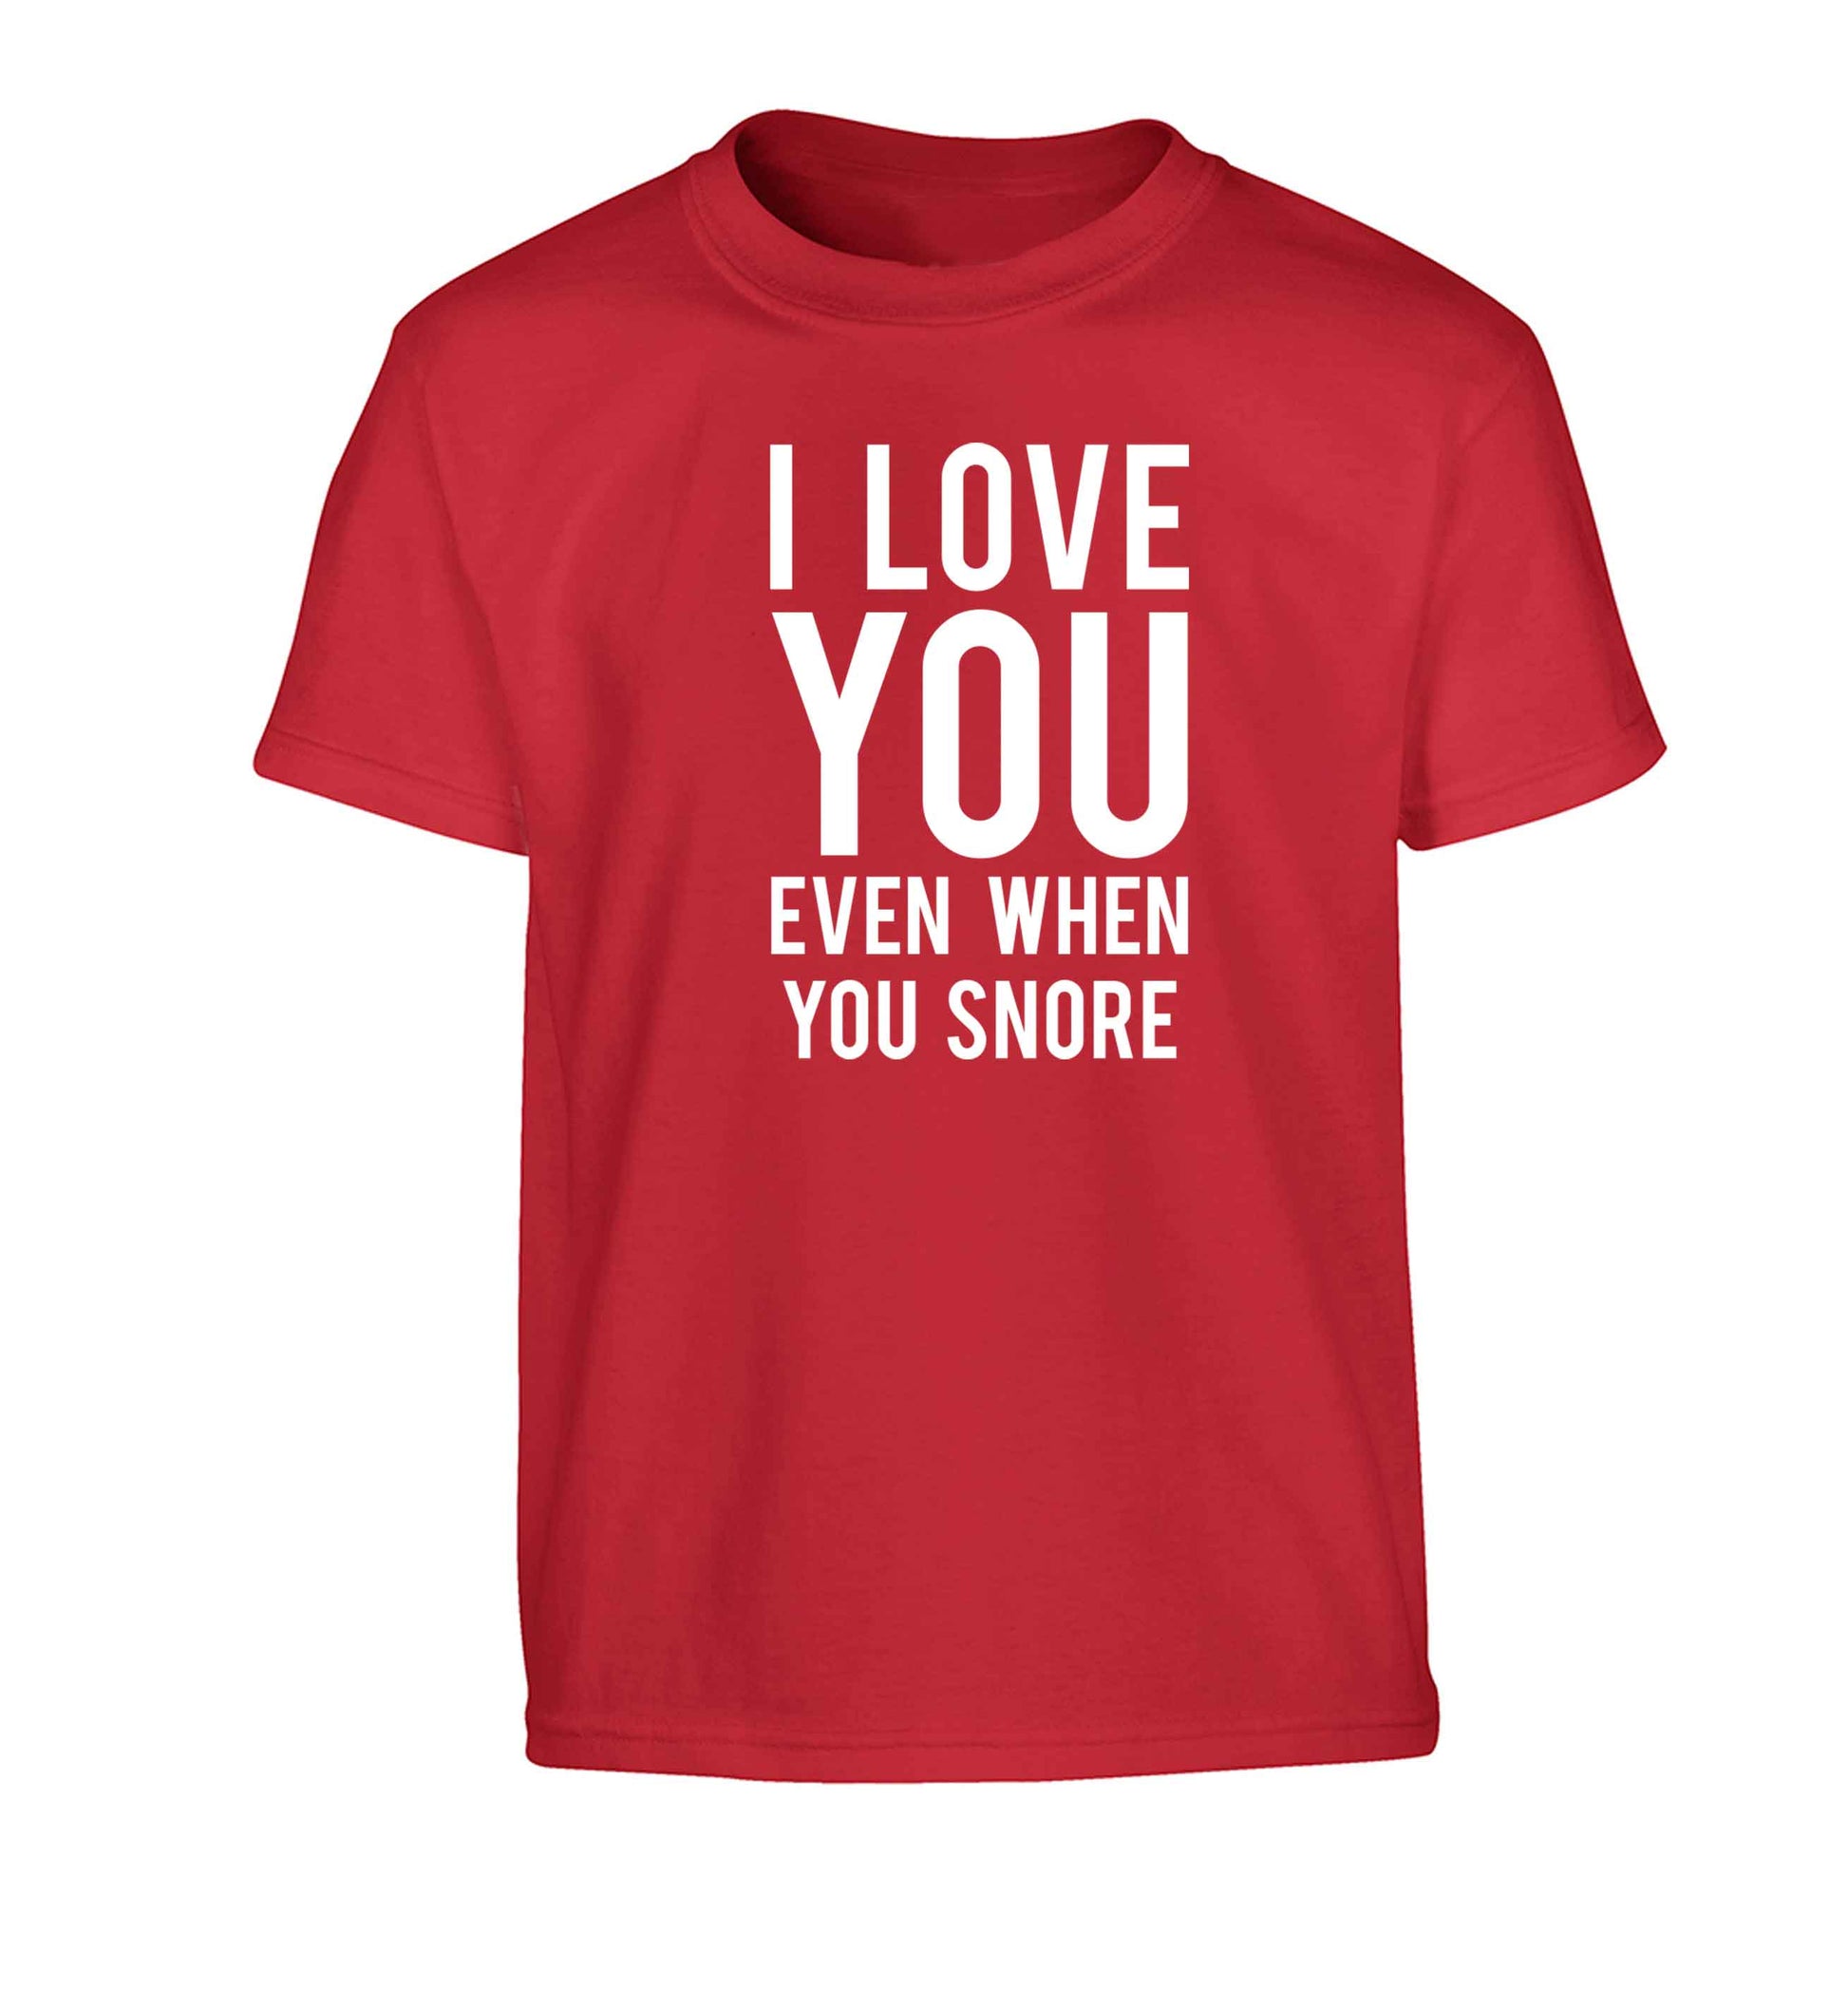 I love you even when you snore Children's red Tshirt 12-13 Years